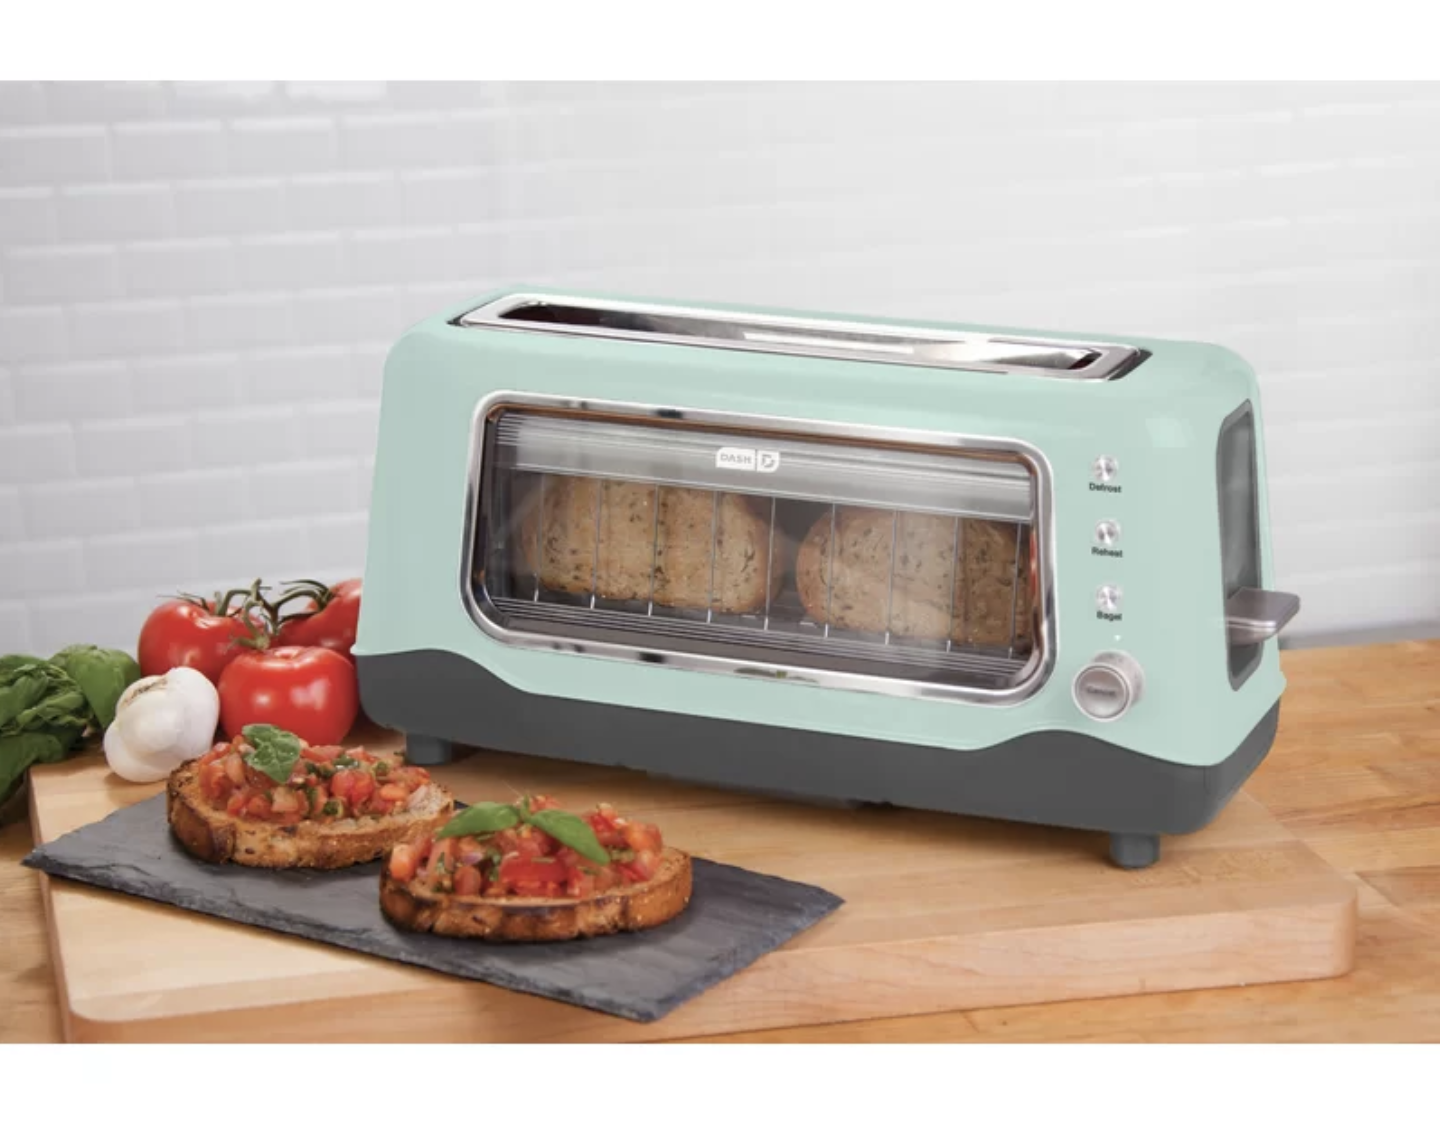 Transparent Toaster For Those Who Like to Watch